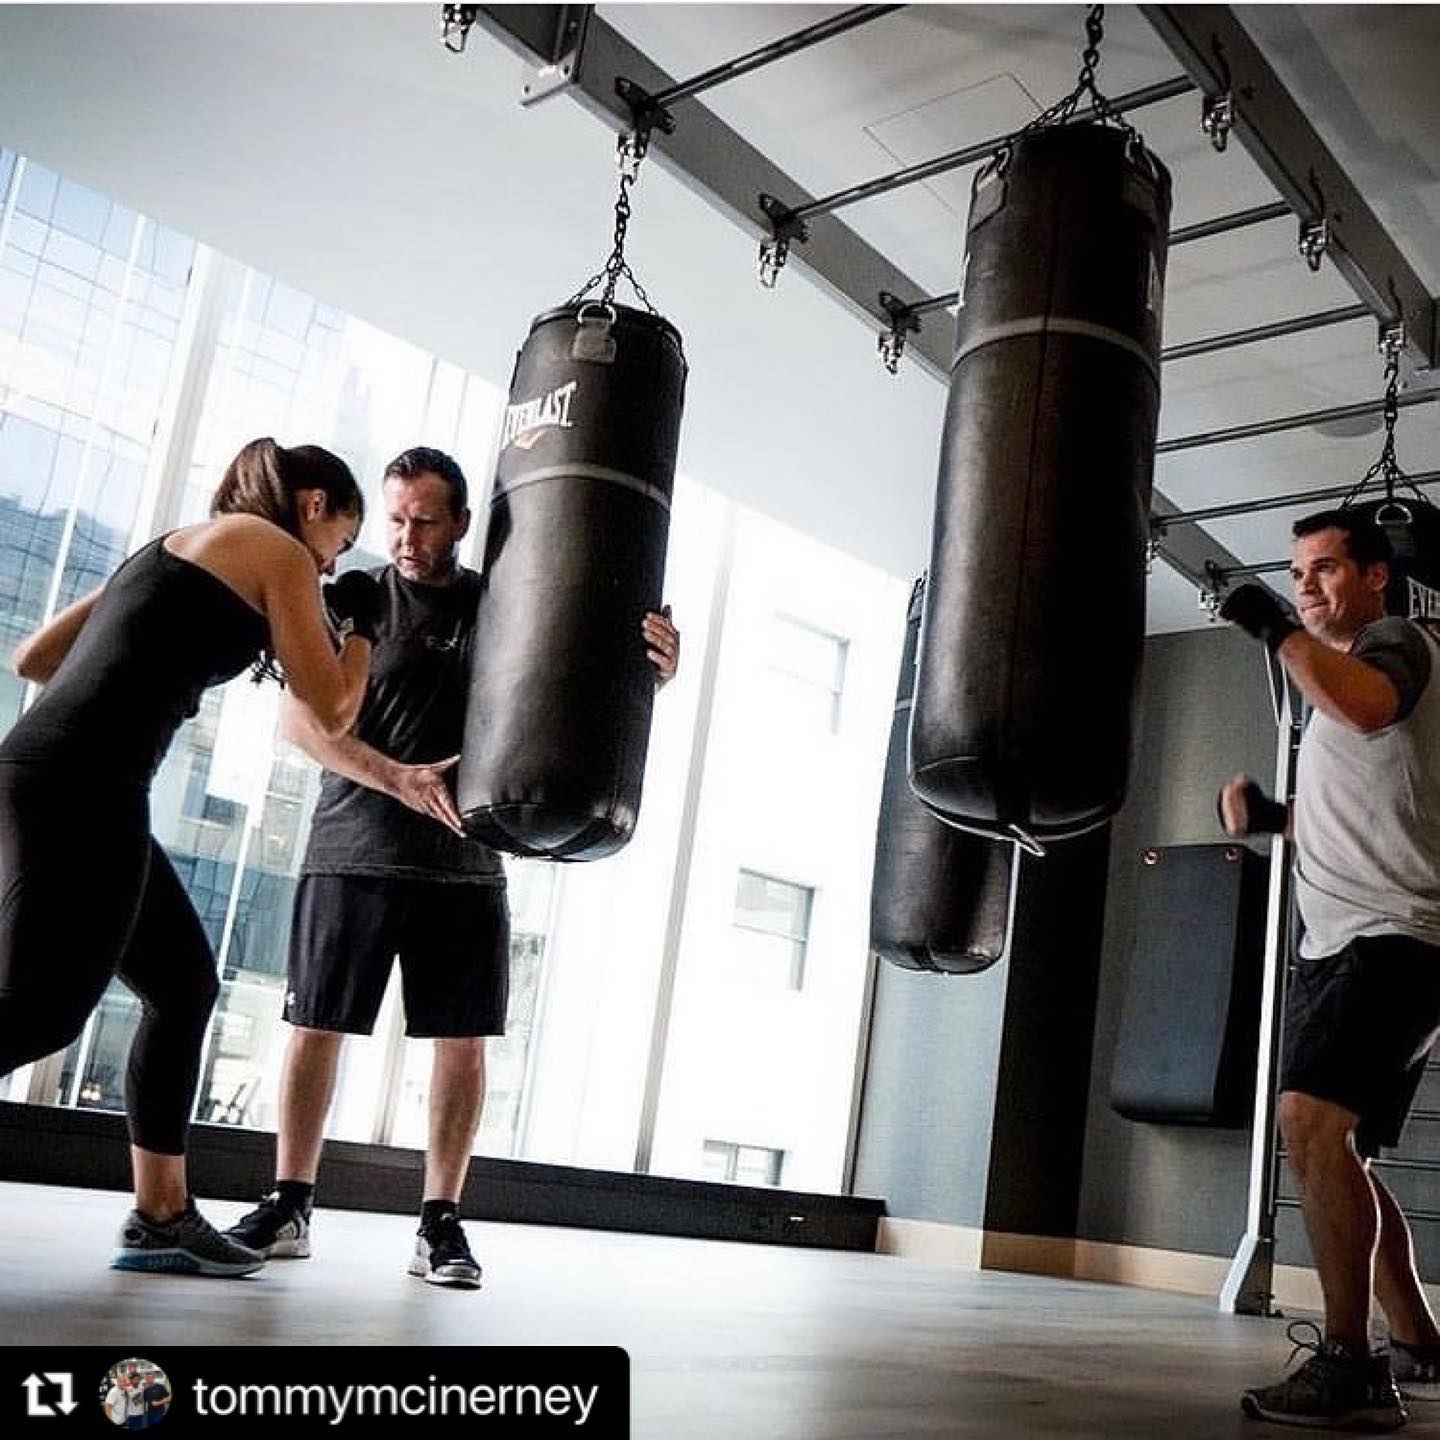 @tommymcinerney・・・
Teaching that Sweet Science in the City. @fitboxboxingfitness